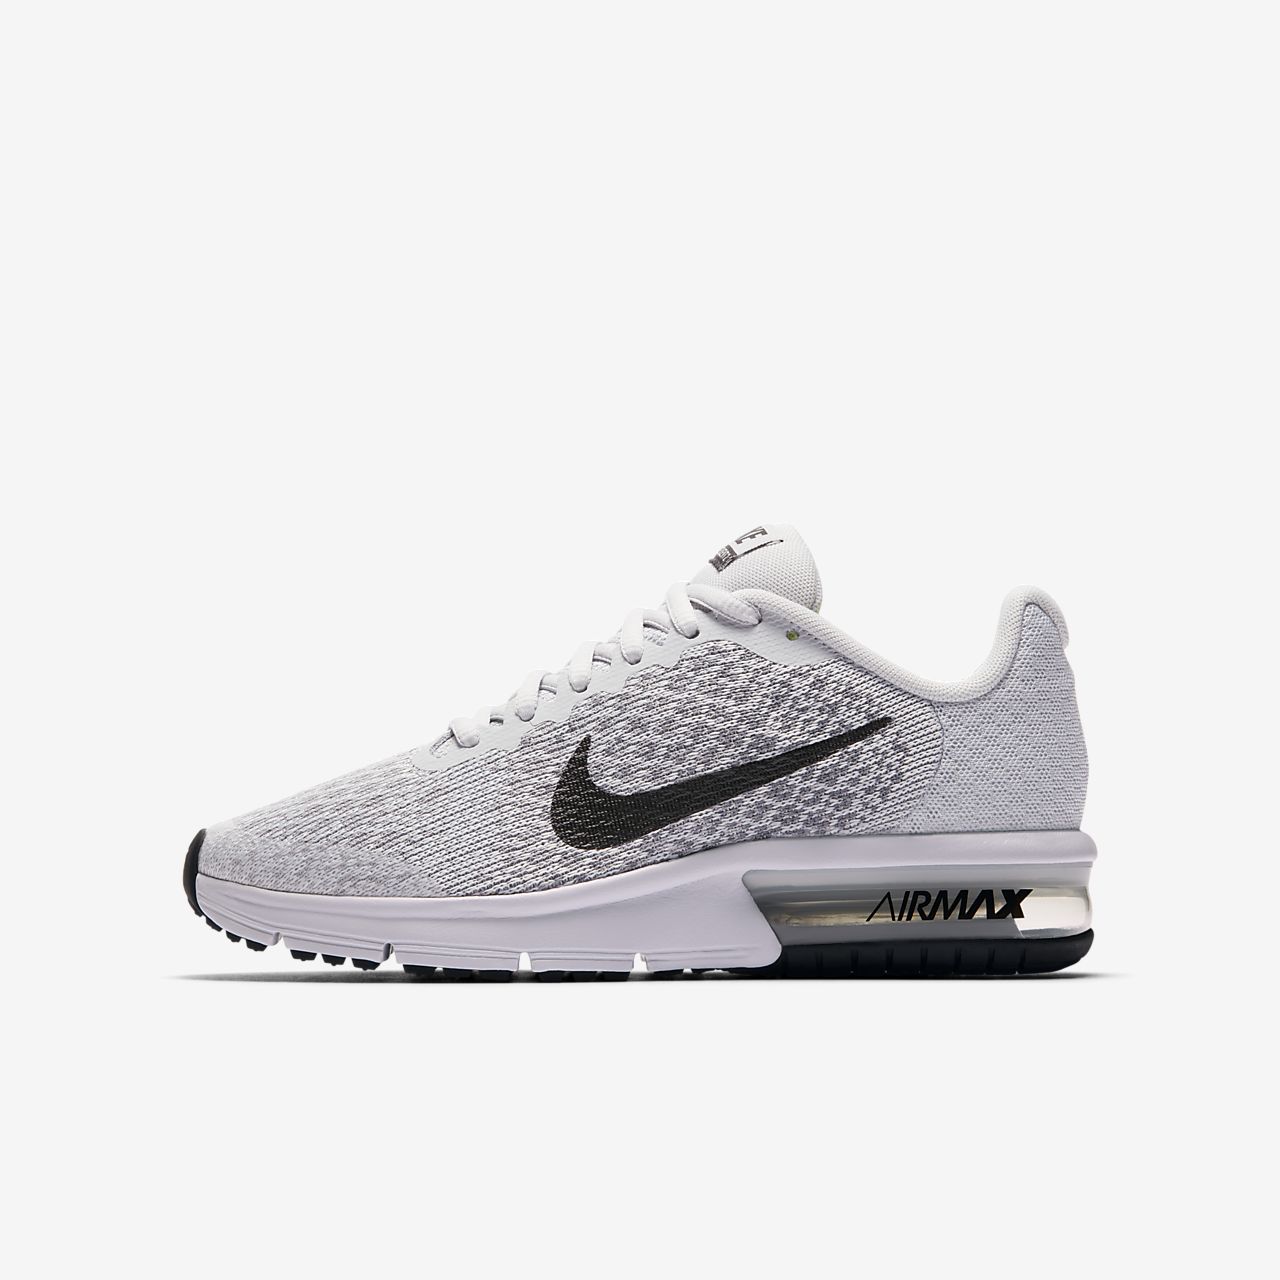 nike air max sequent 2 nere